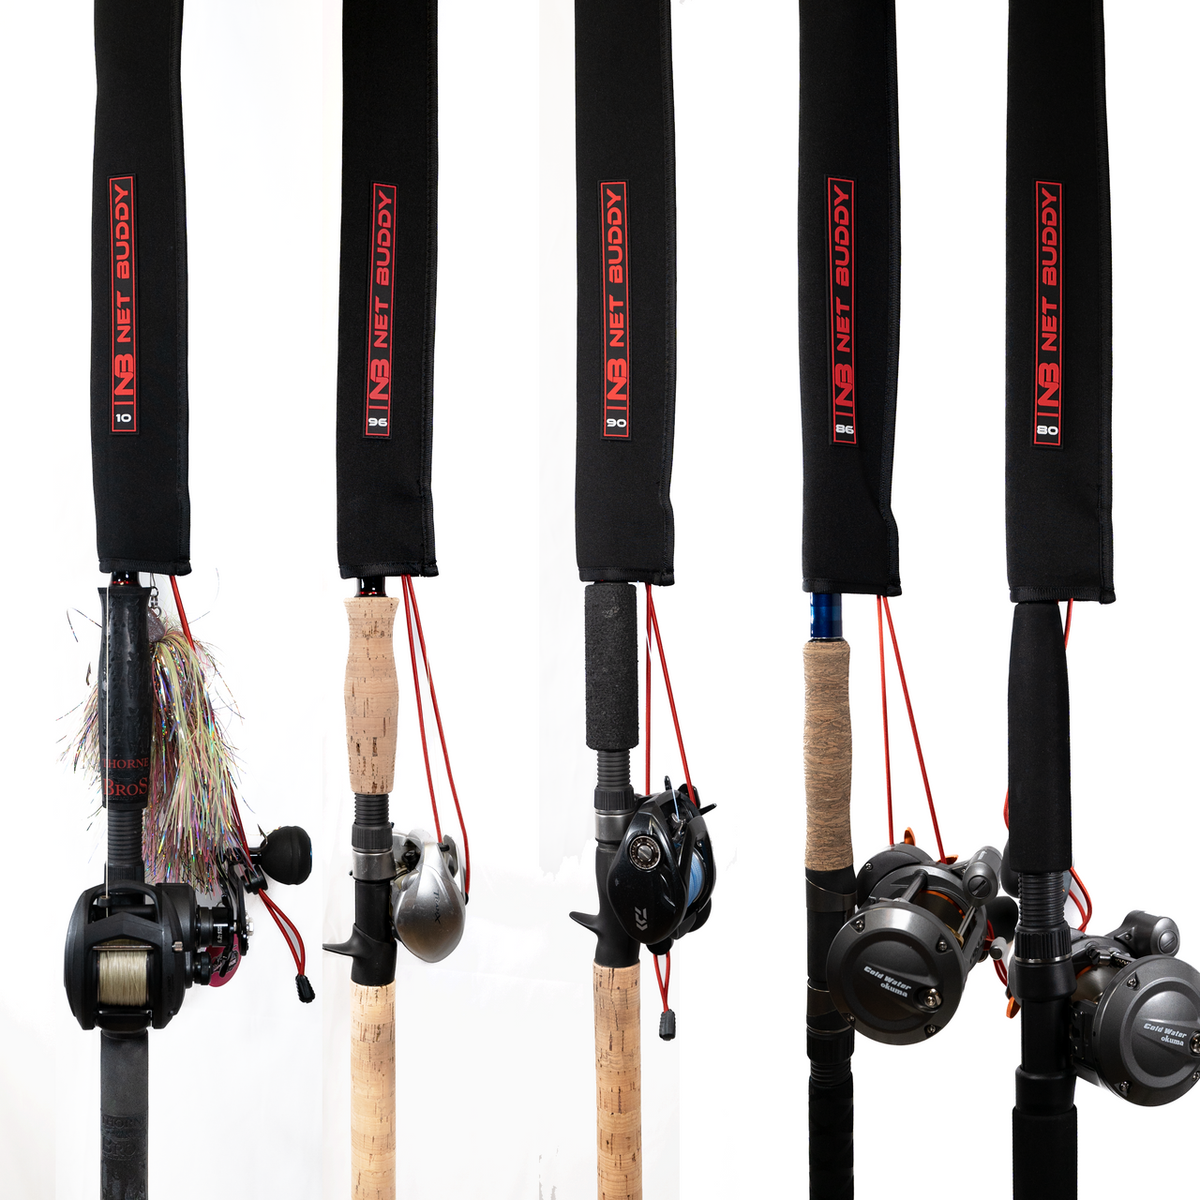 View of Rods-Reels-Accessories Net Buddy Musky Rod Sleeves available at EZOKO Pike and Musky Shop